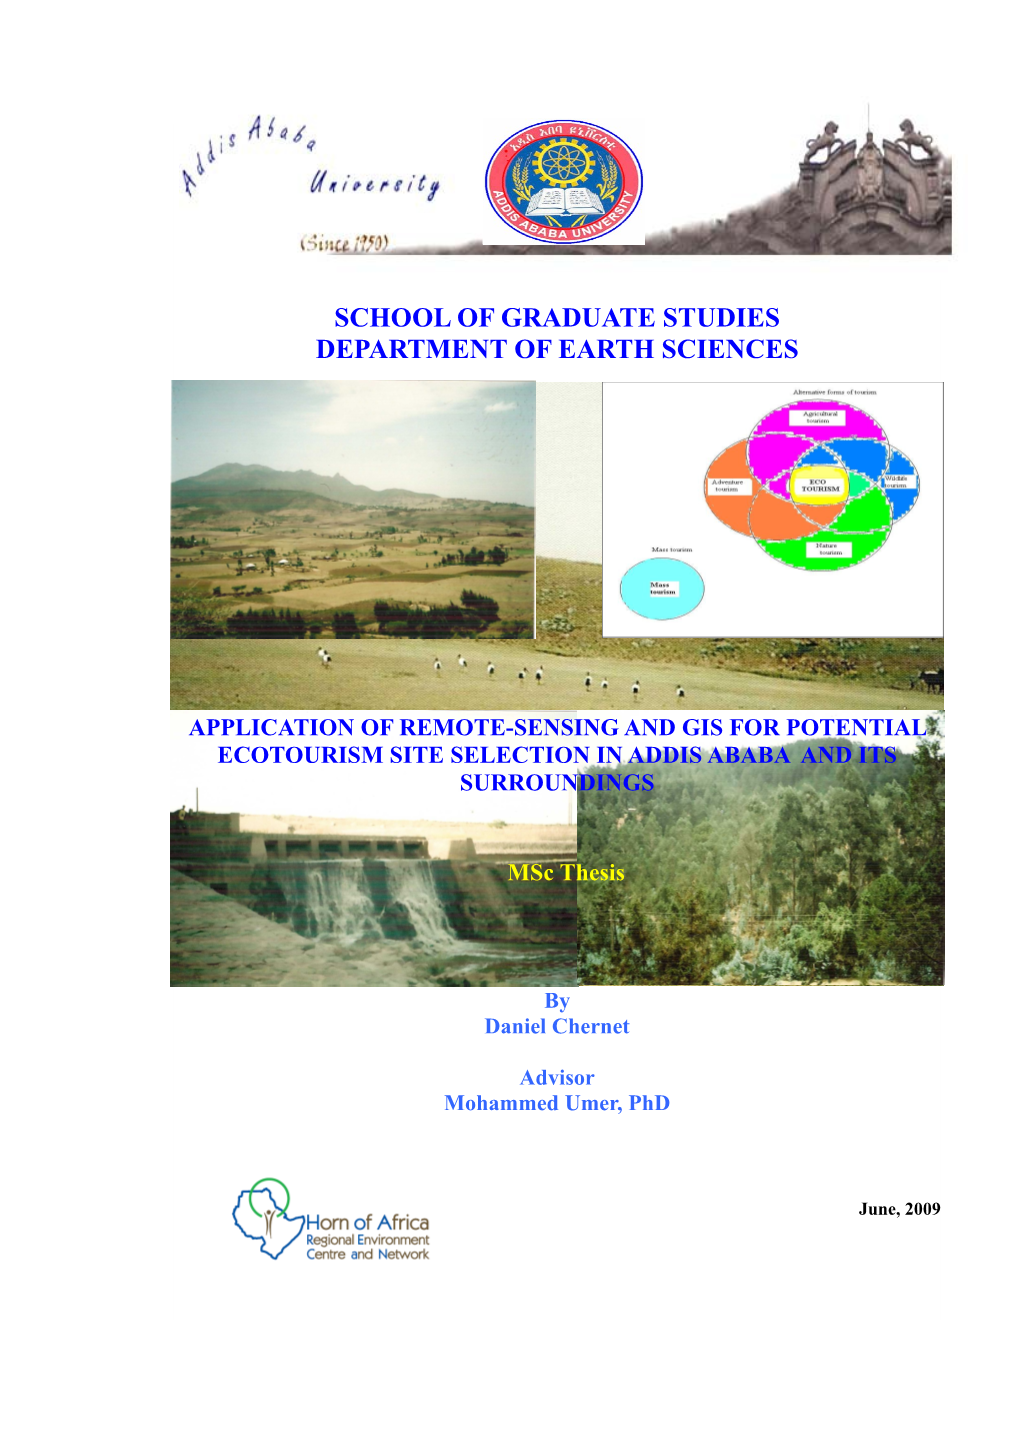 Application of Remote-Sensing and Gis for Potential Ecotourism Site Selection in Addis Ababa and Its Surroundings